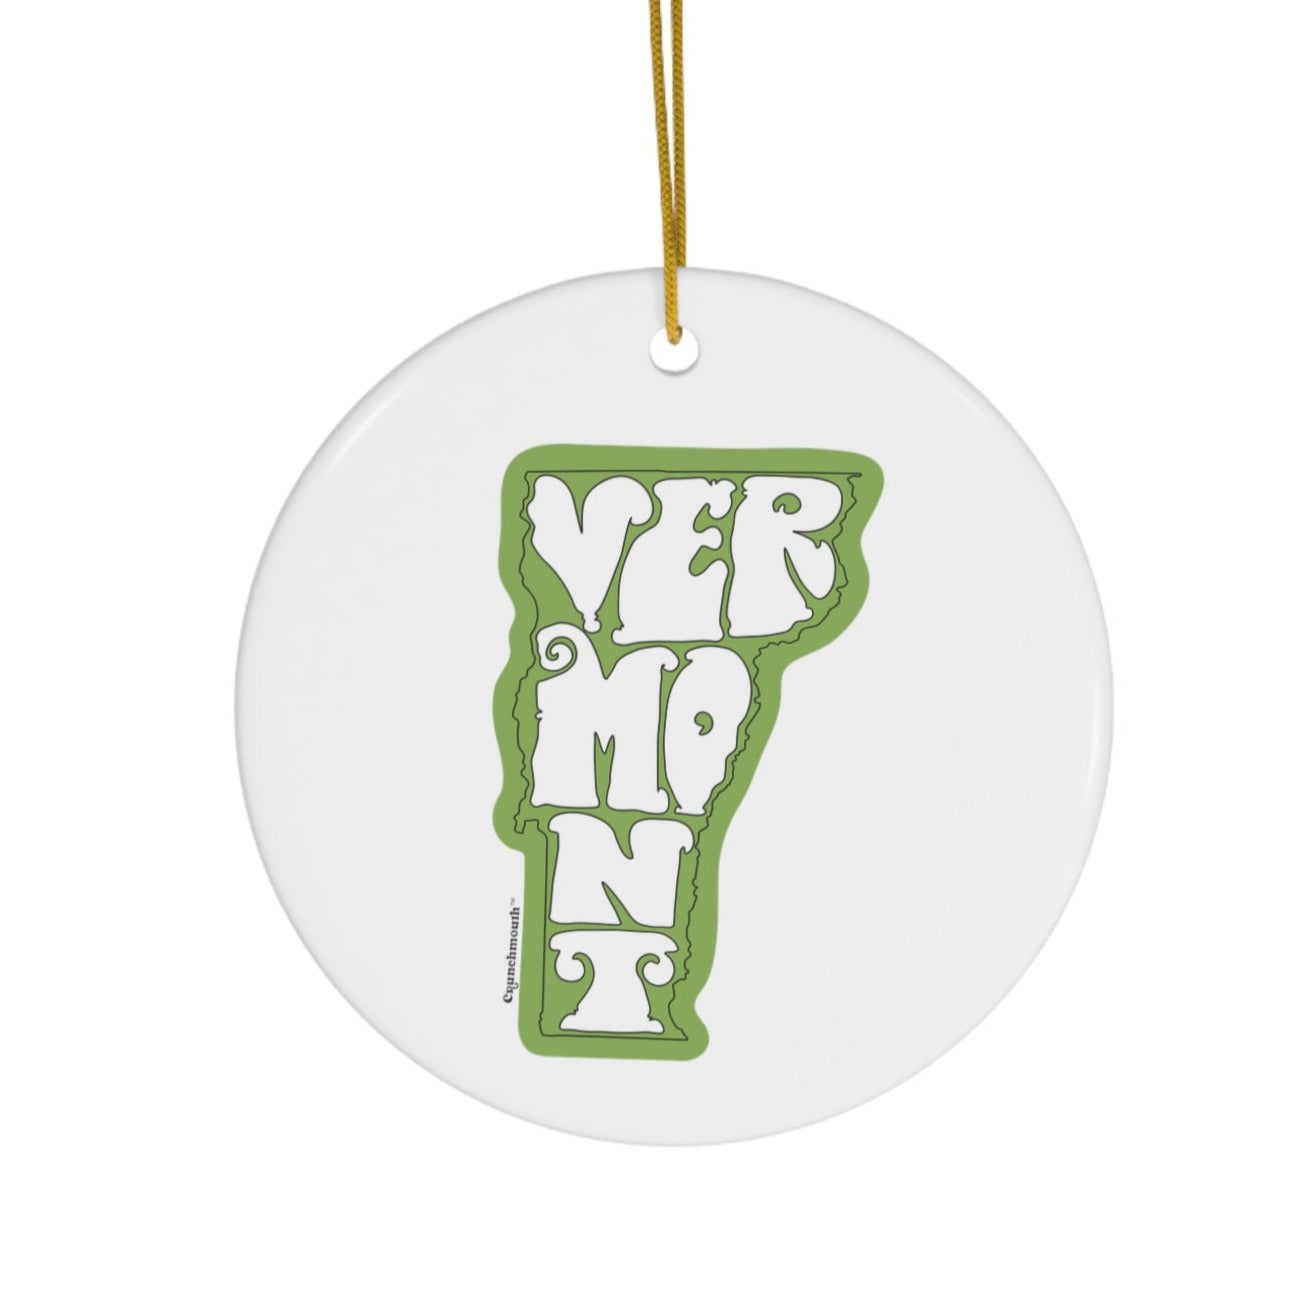 state of vermont ceramic Christmas ornament